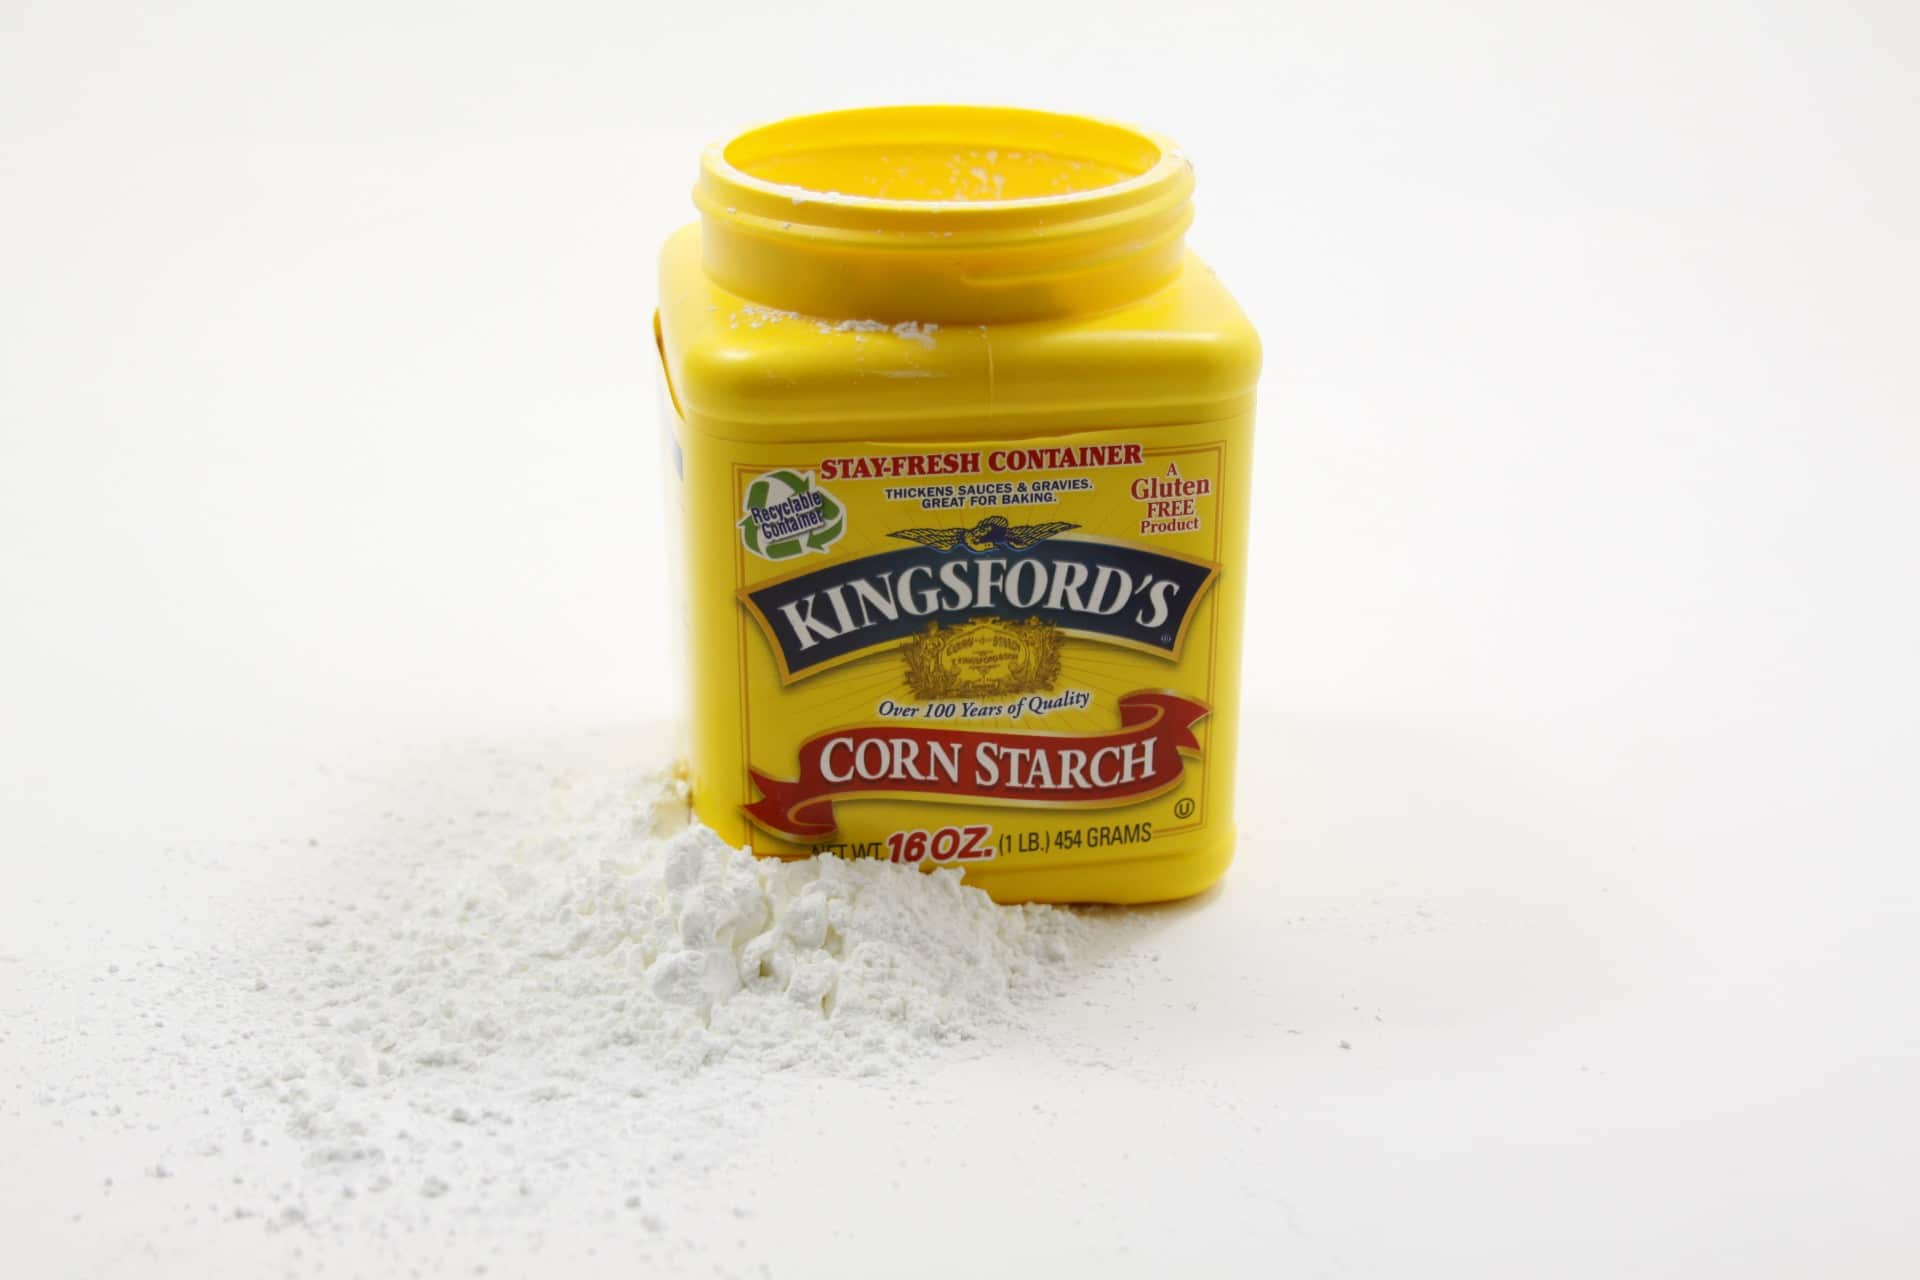 Corn starch packaging on white background.  Illustrative image of dried blood stain text.